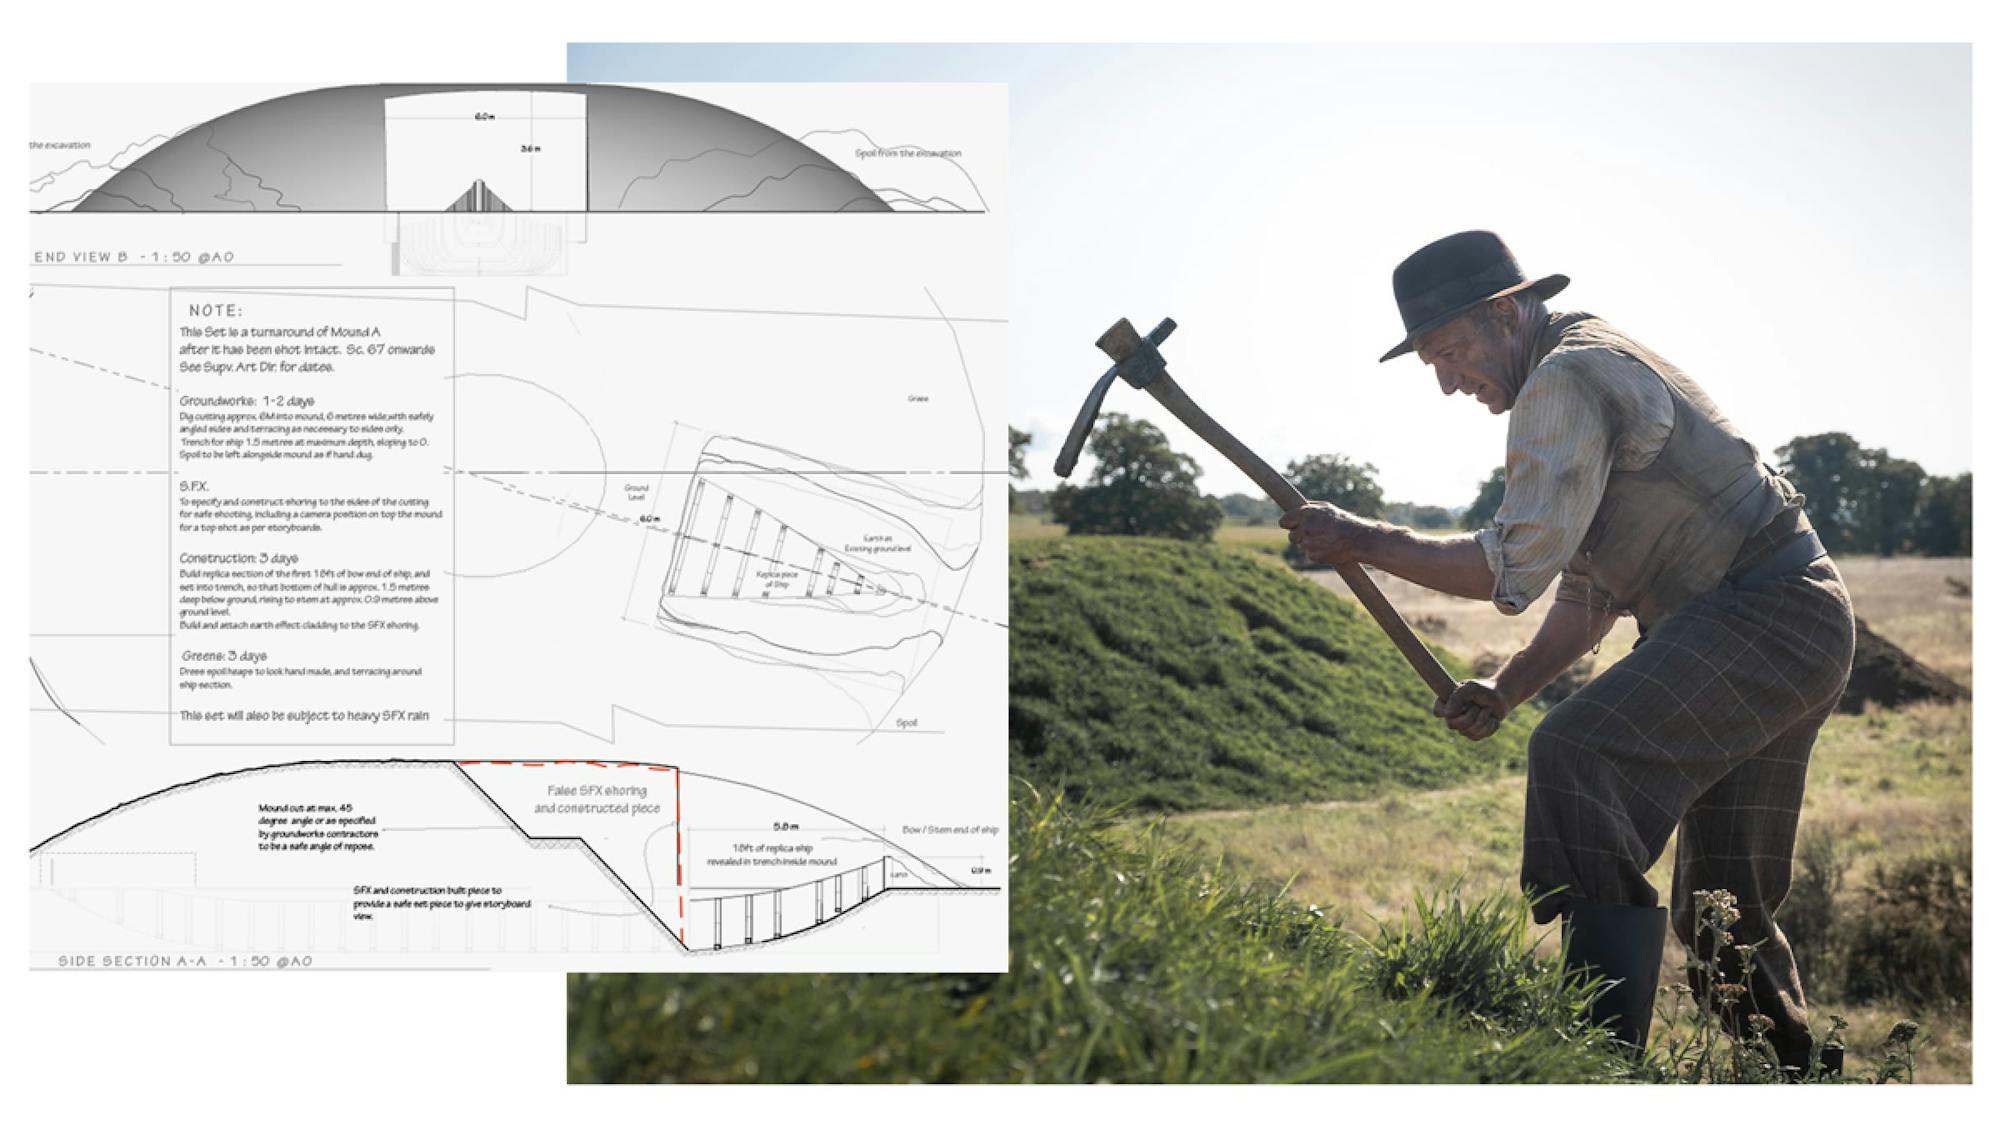 Basil Brown takes a pickaxe to one of the ancient burial mounds in a still from the film. A production sketch shows a map of the digsite.